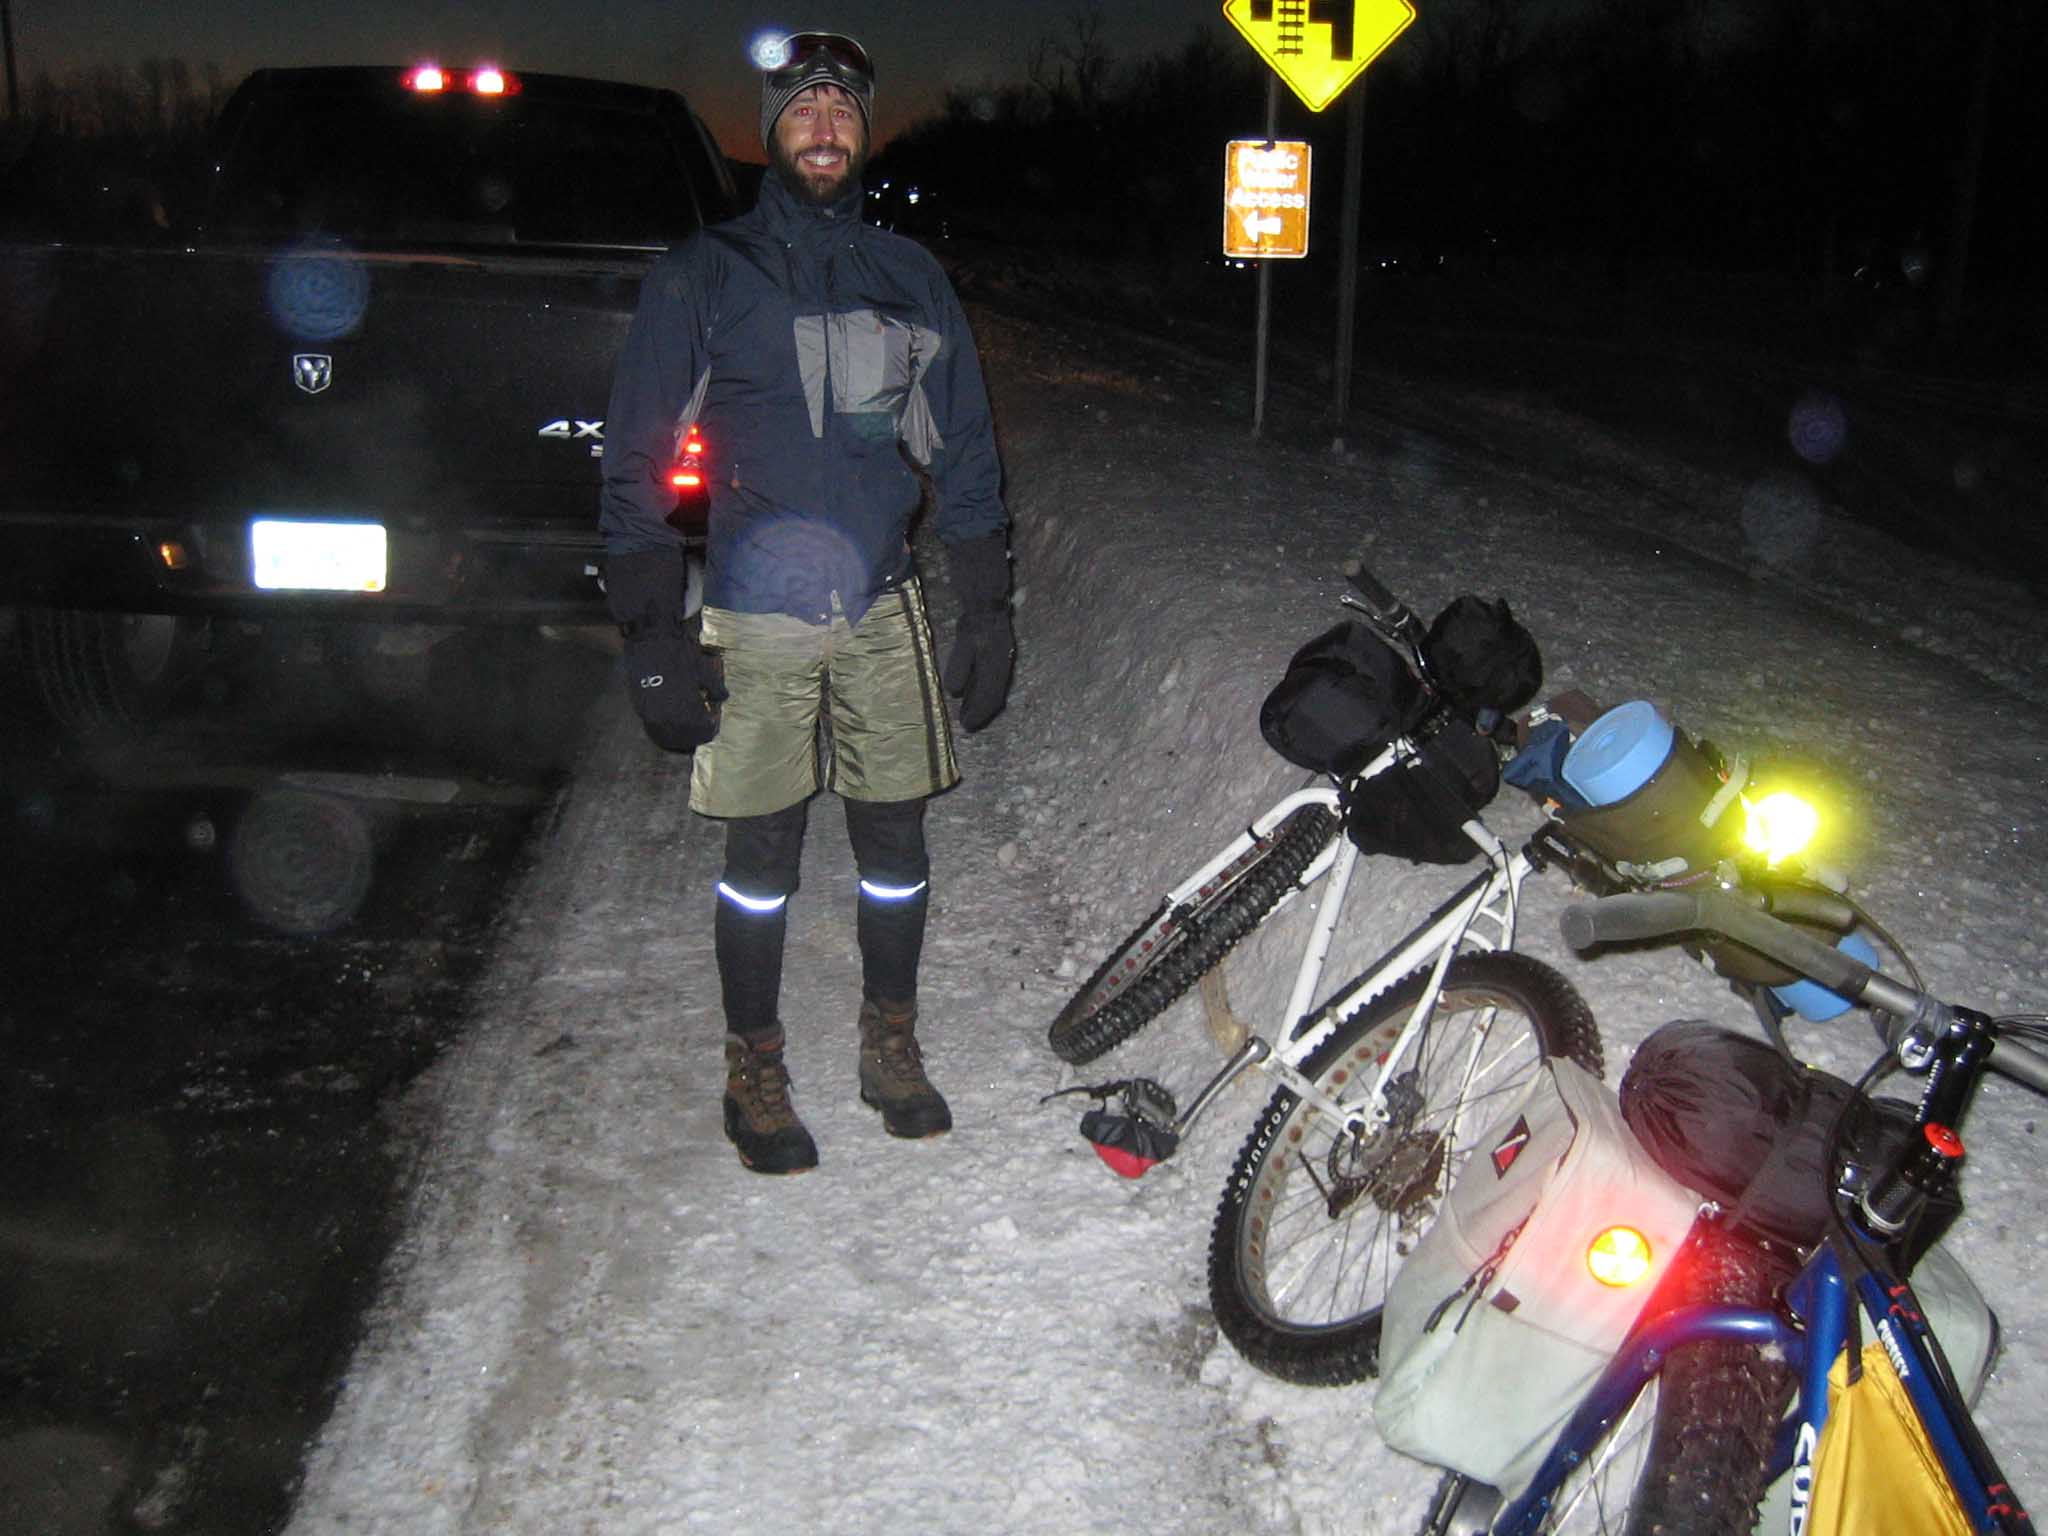 A smiling cyclist standing on a snowy roadside with 2 bikes laying down, at night